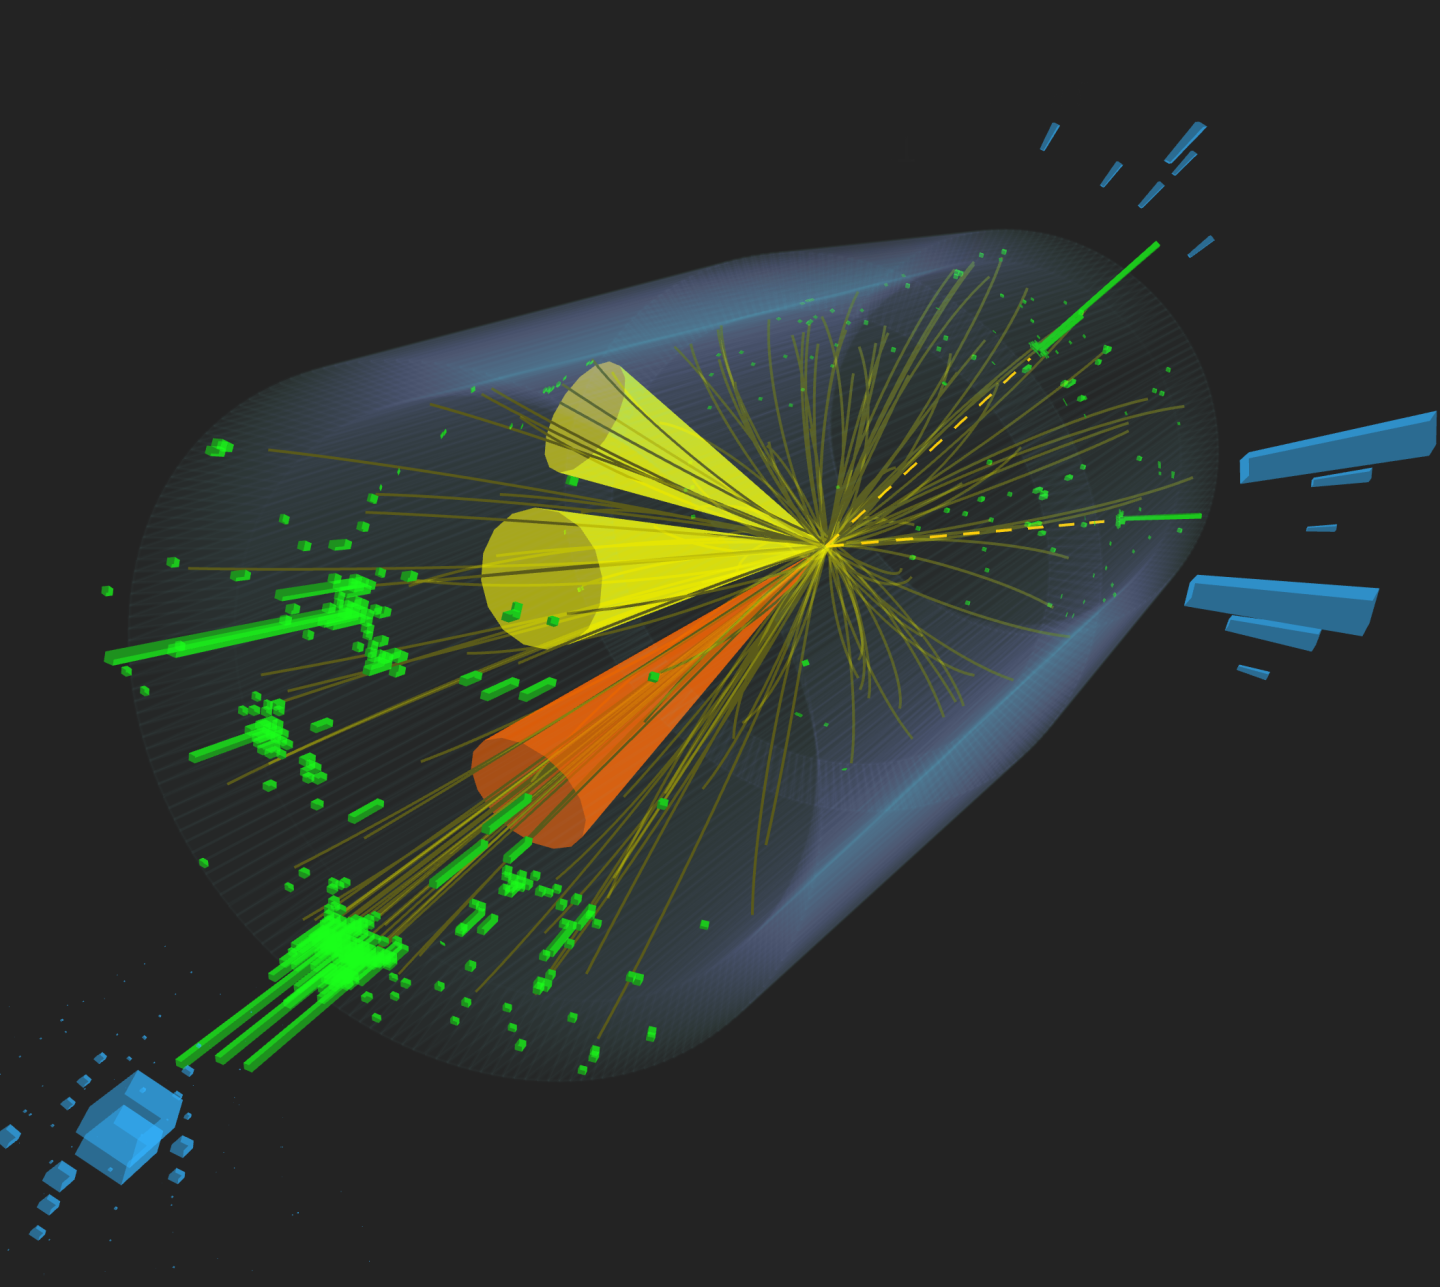 Candidate Higgs boson event from collisions between protons in the CMS detector on the LHC (Image: CMS/CERN)